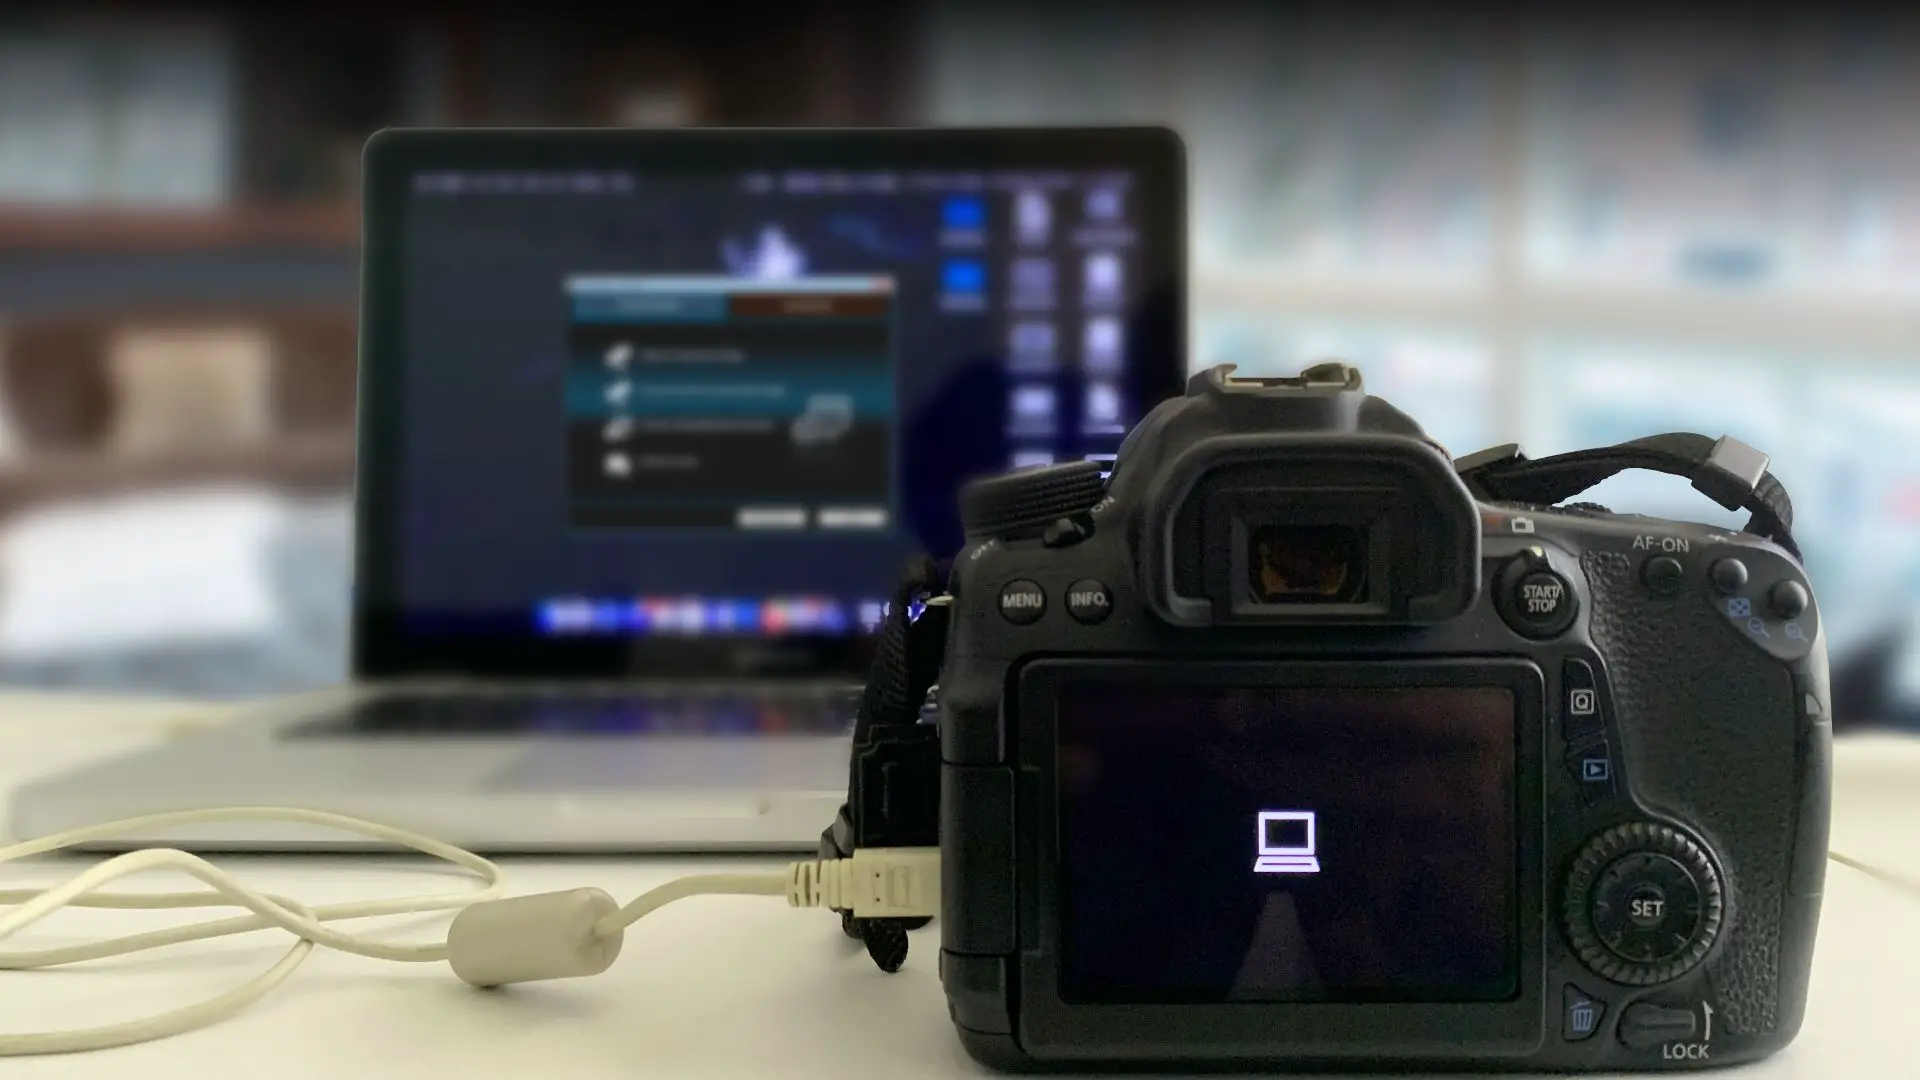 Step-by-step process on how to connect Canon camera to Mac